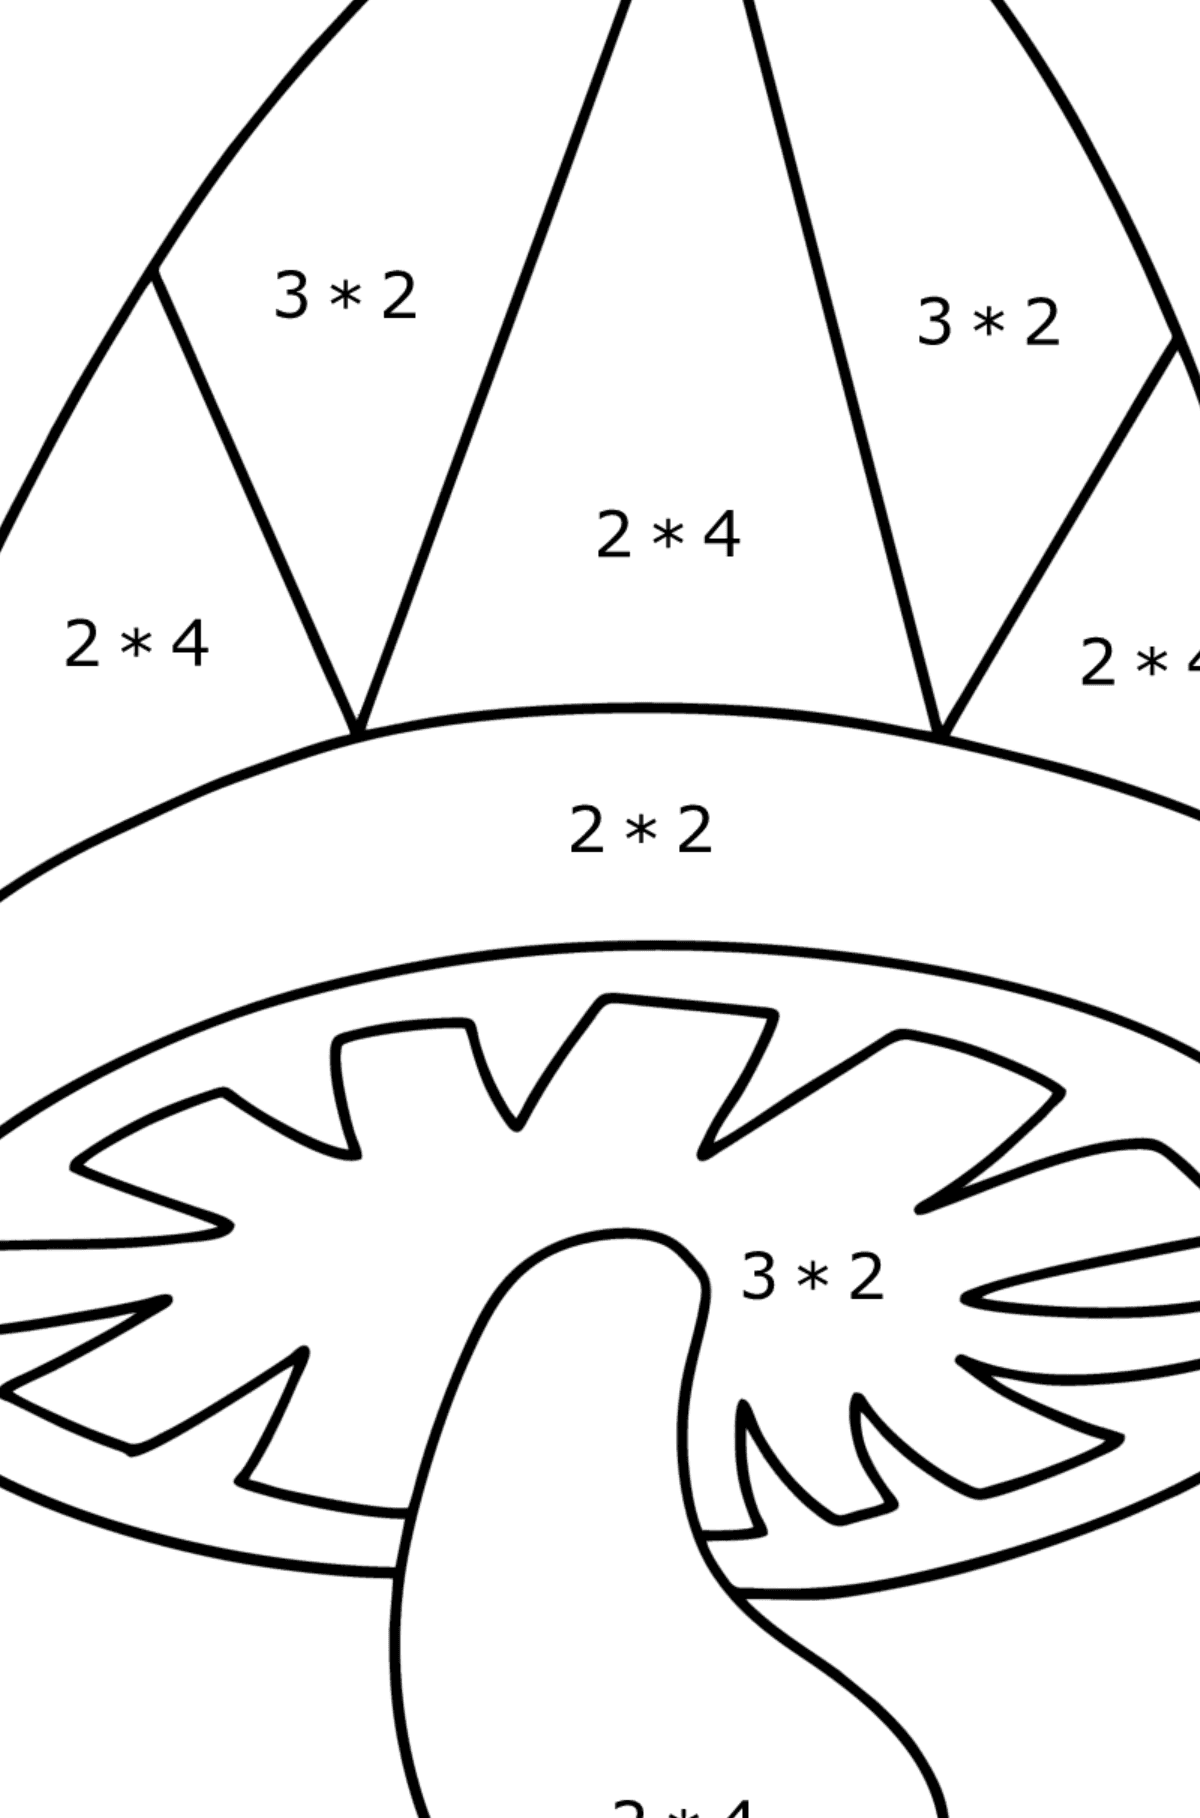 Simple Zen mushroom coloring page - Math Coloring - Multiplication for Kids